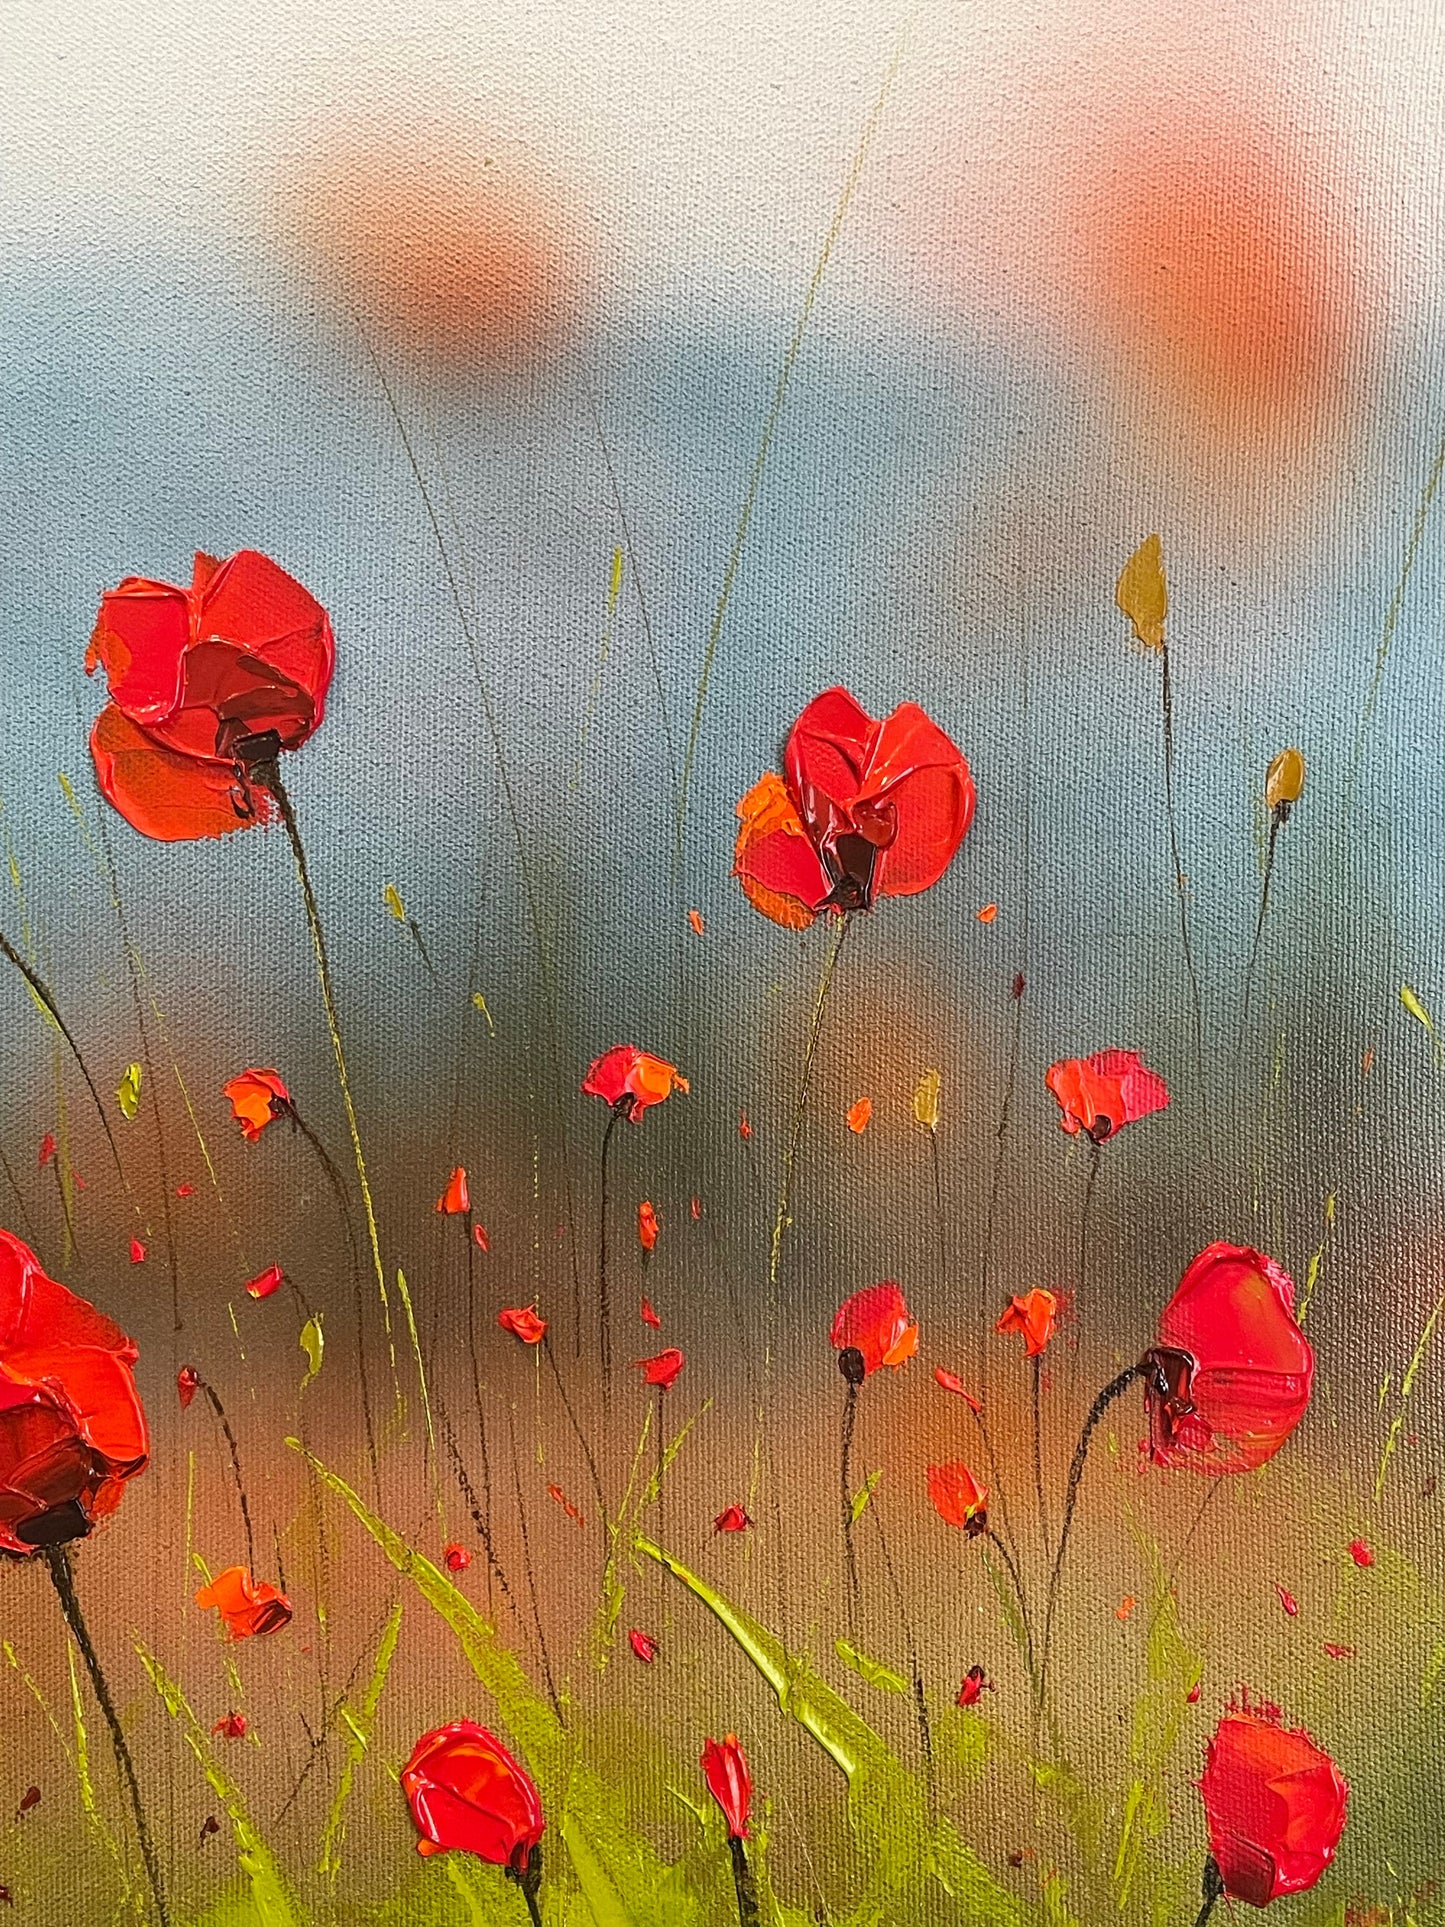 Peaceful Poppies